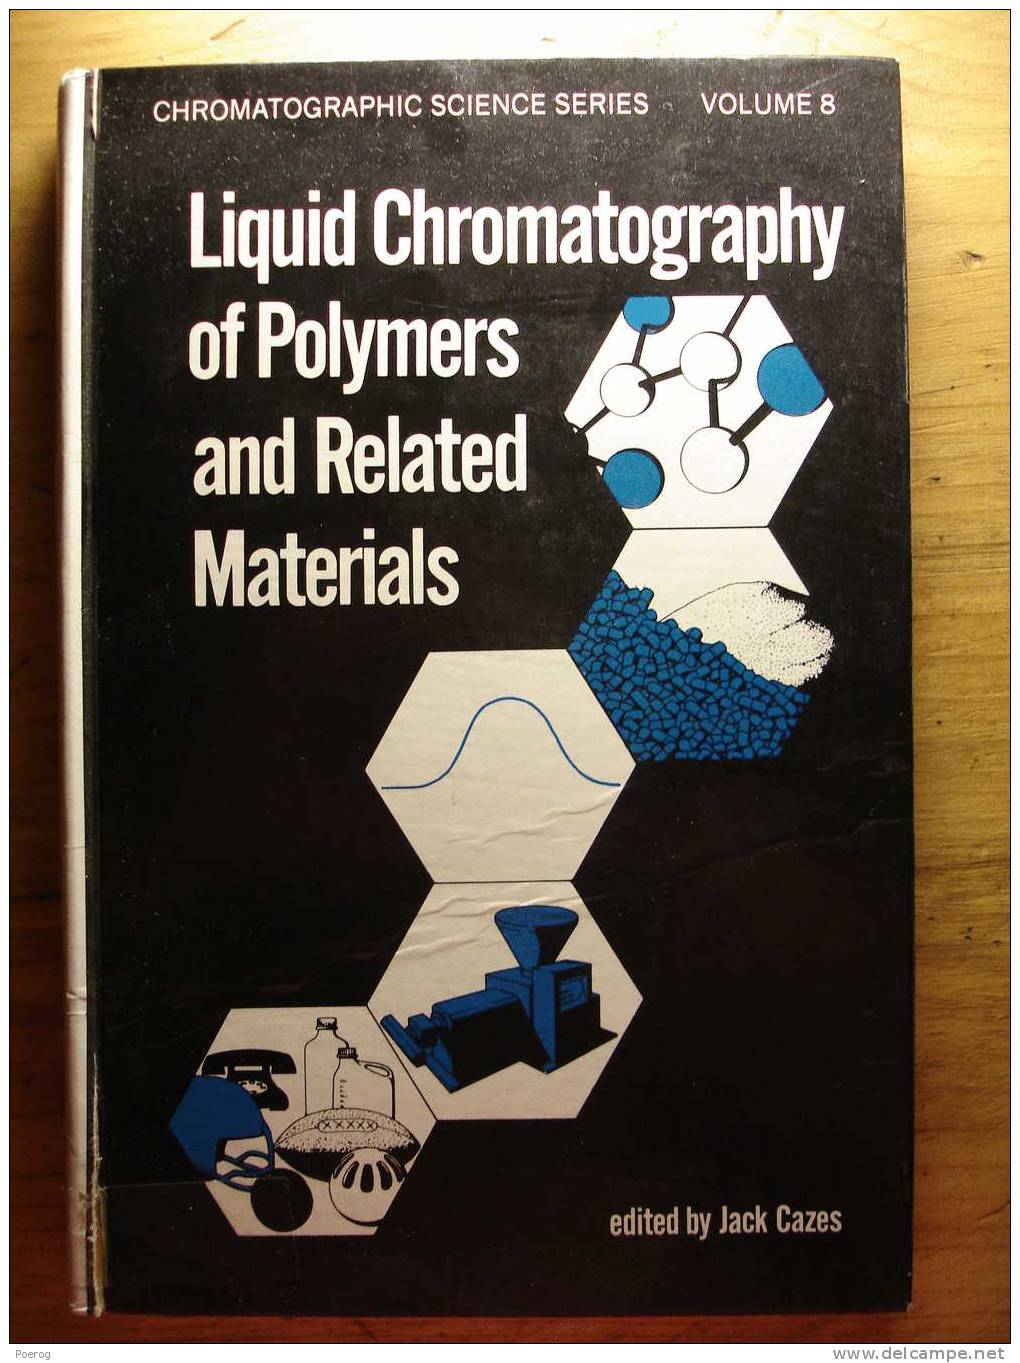 LIQUID CHROMATOGRAPHY OF POLYMERS AND RELATED MATERIALS By JACK CAZES - DEKKER NEW YORK 1977 - Chimica